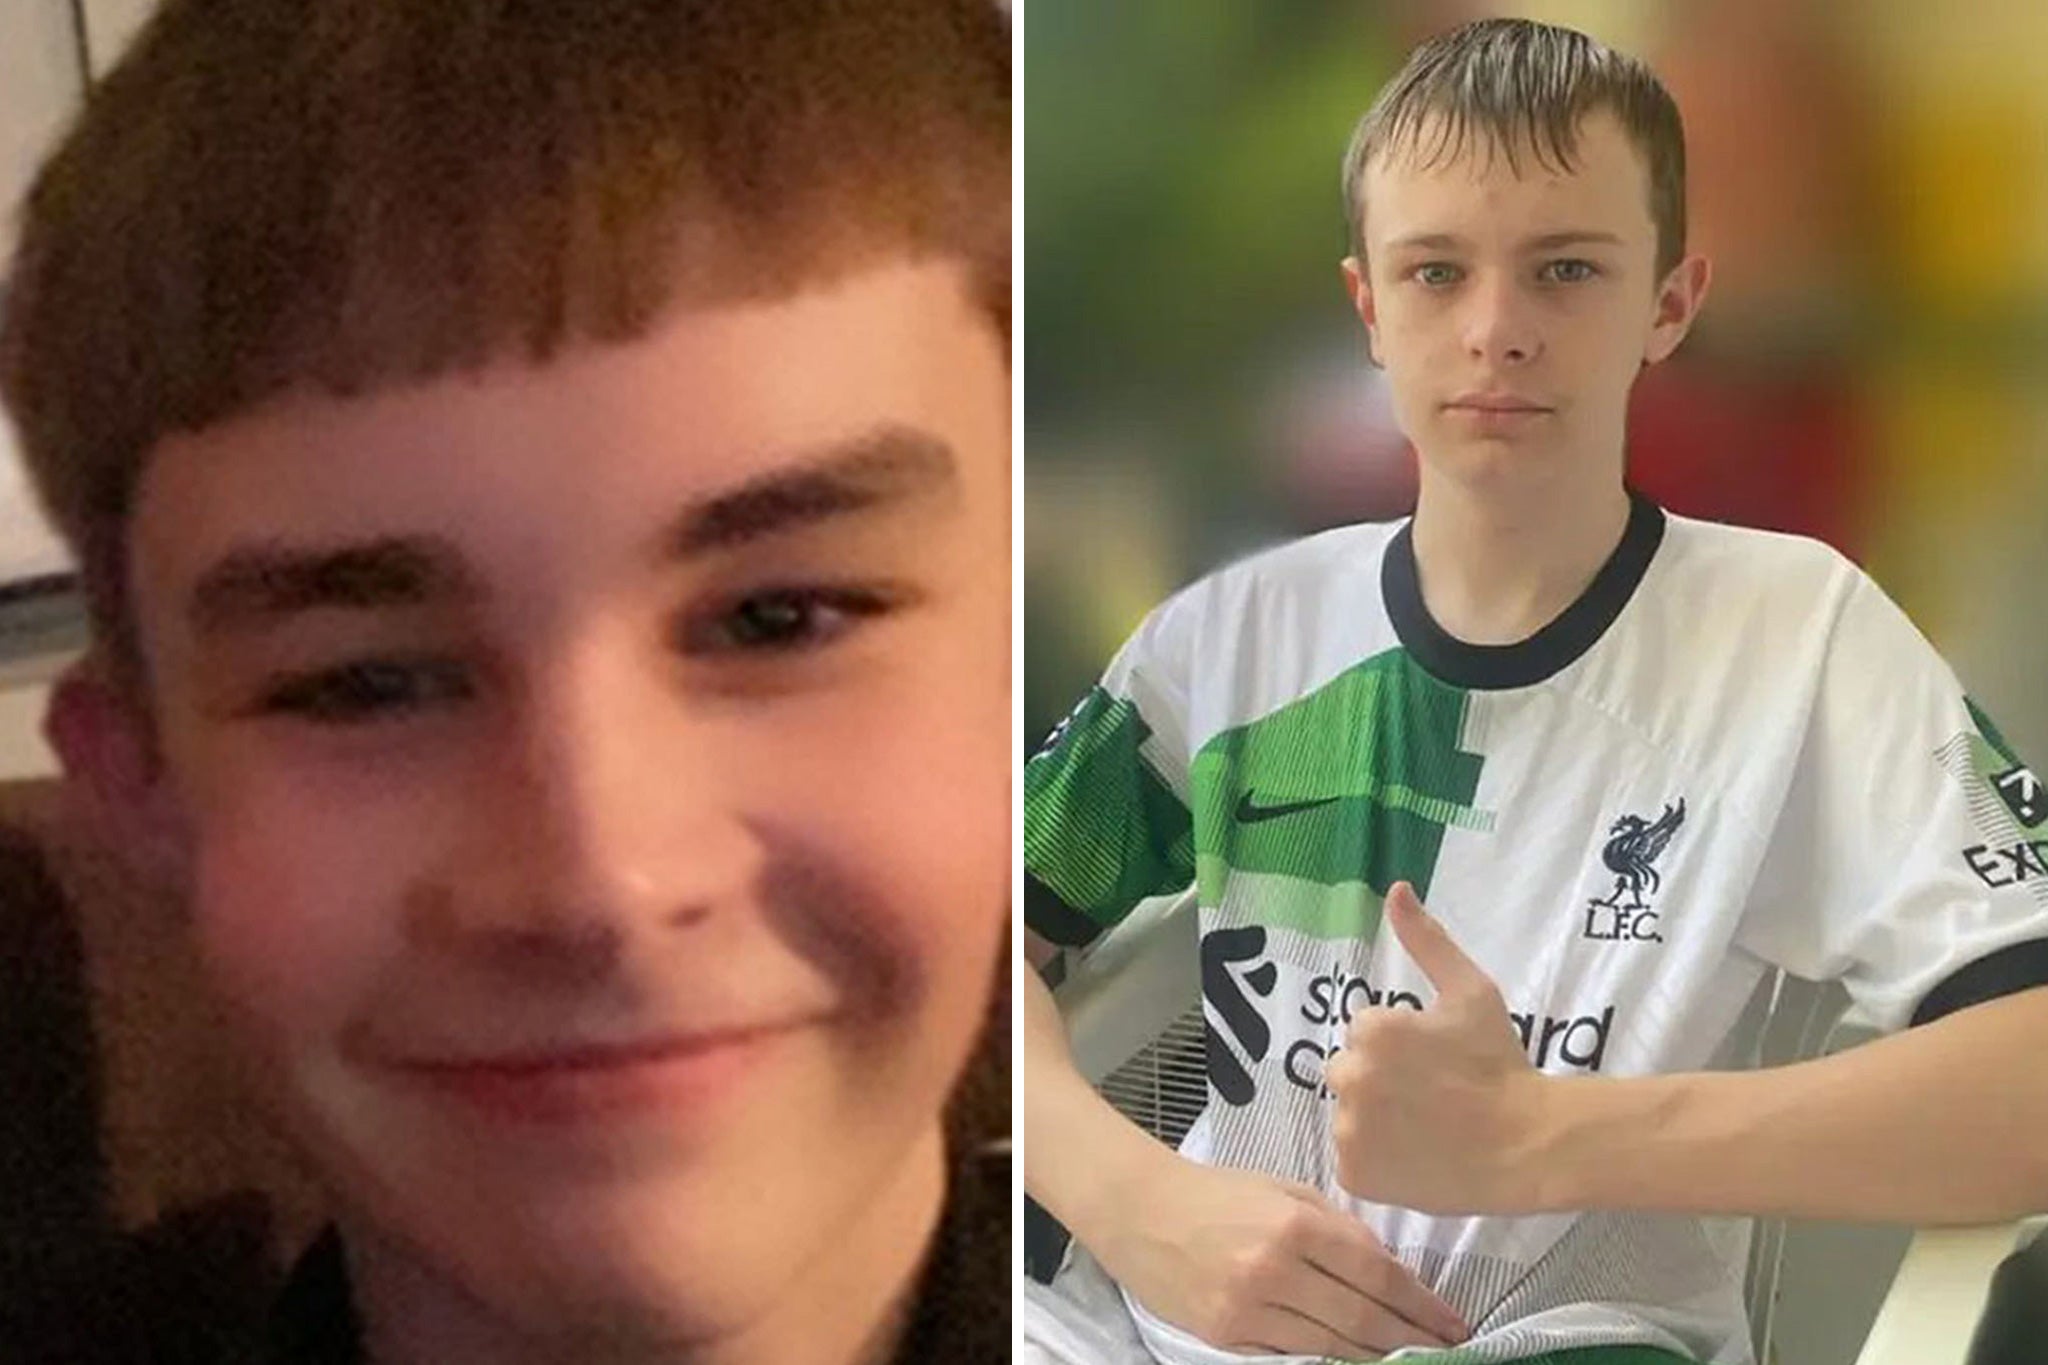 Mason Rist, 15, and Max Dixon, 16, were both killed in the incident in Knowle West, Bristol